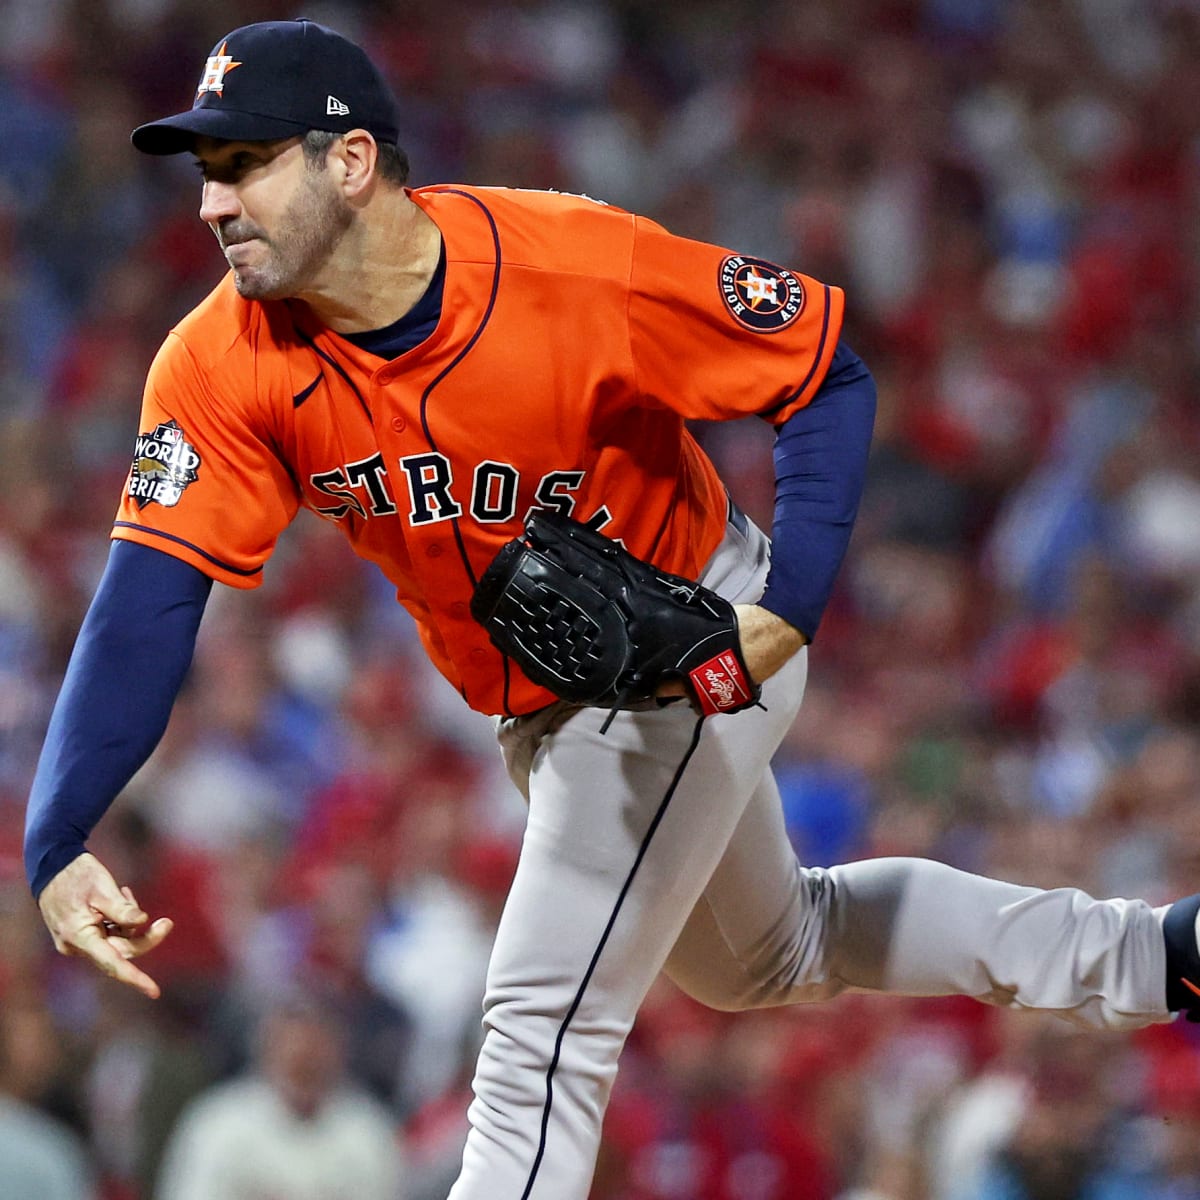 Astros Outlast Dodgers to Clinch First World Series Title - The